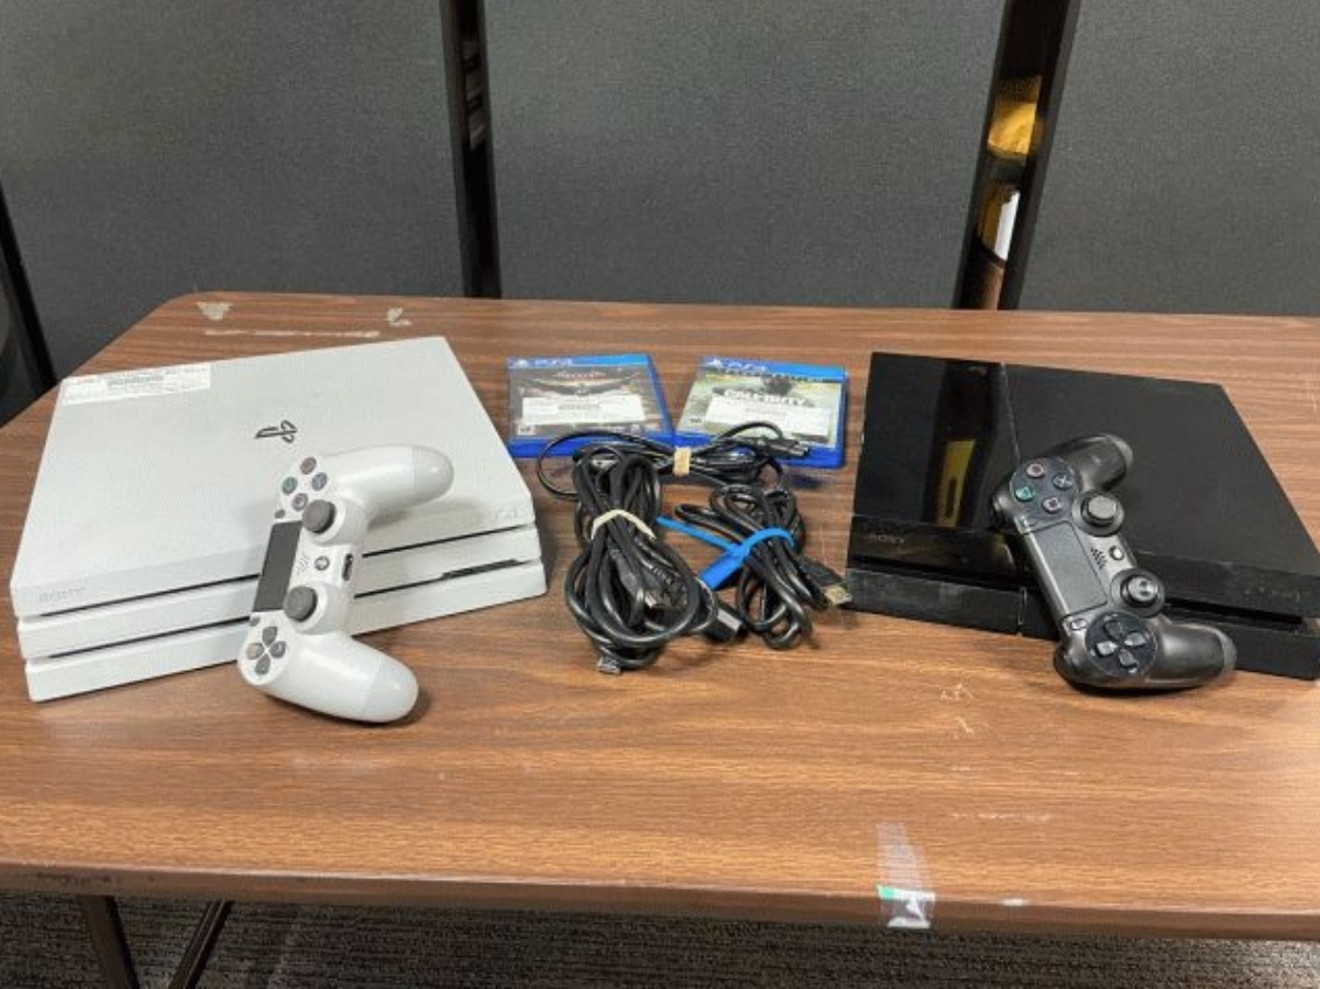 May we interest you in a couple of PlayStation 4s, condition unknown?